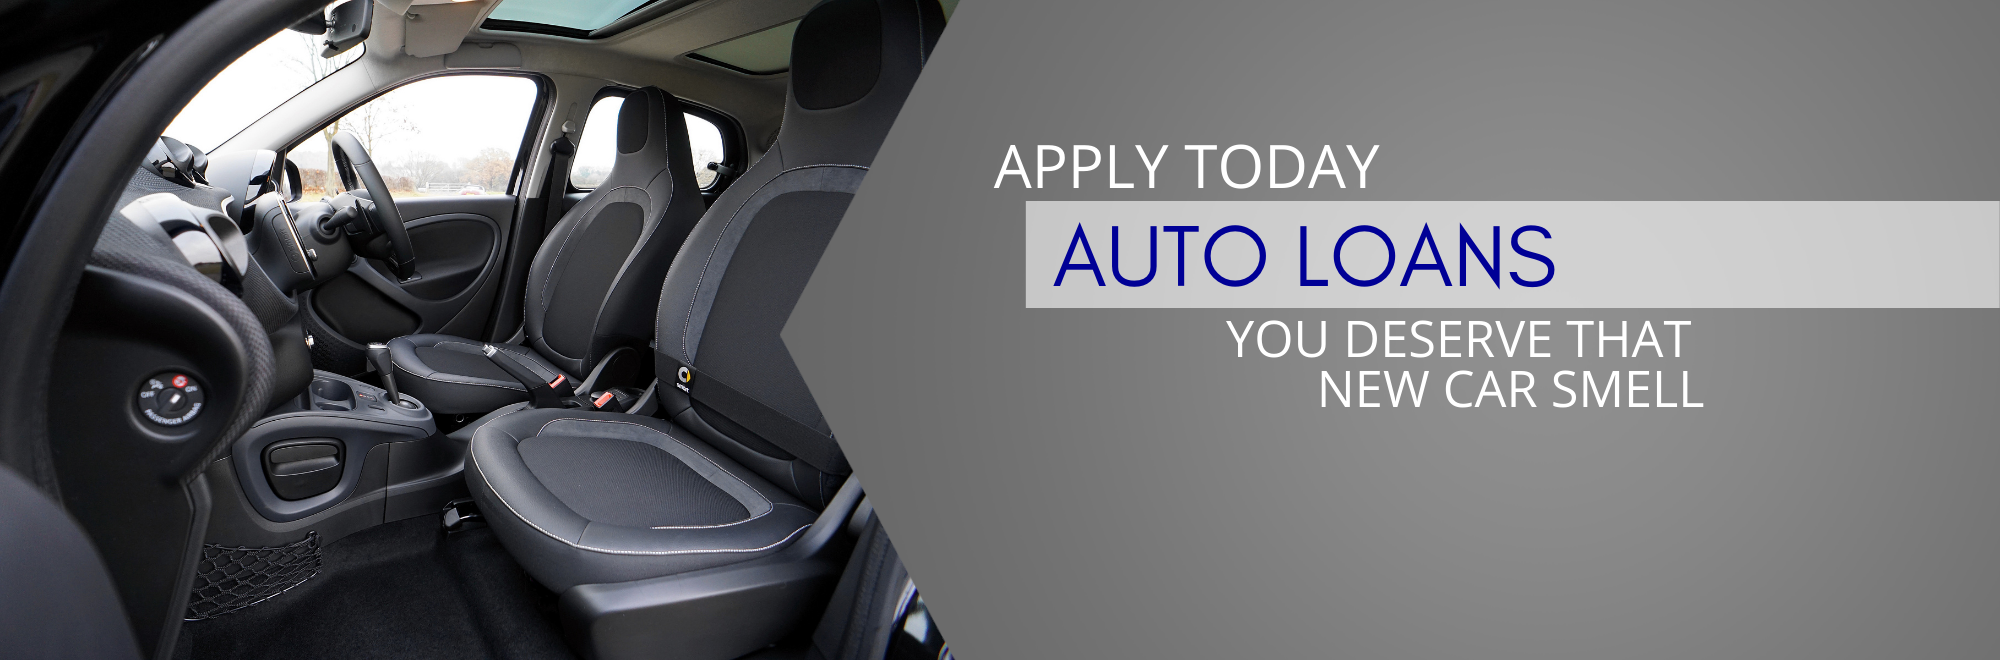 Apply Today Auto Loans You deserve that new car smell